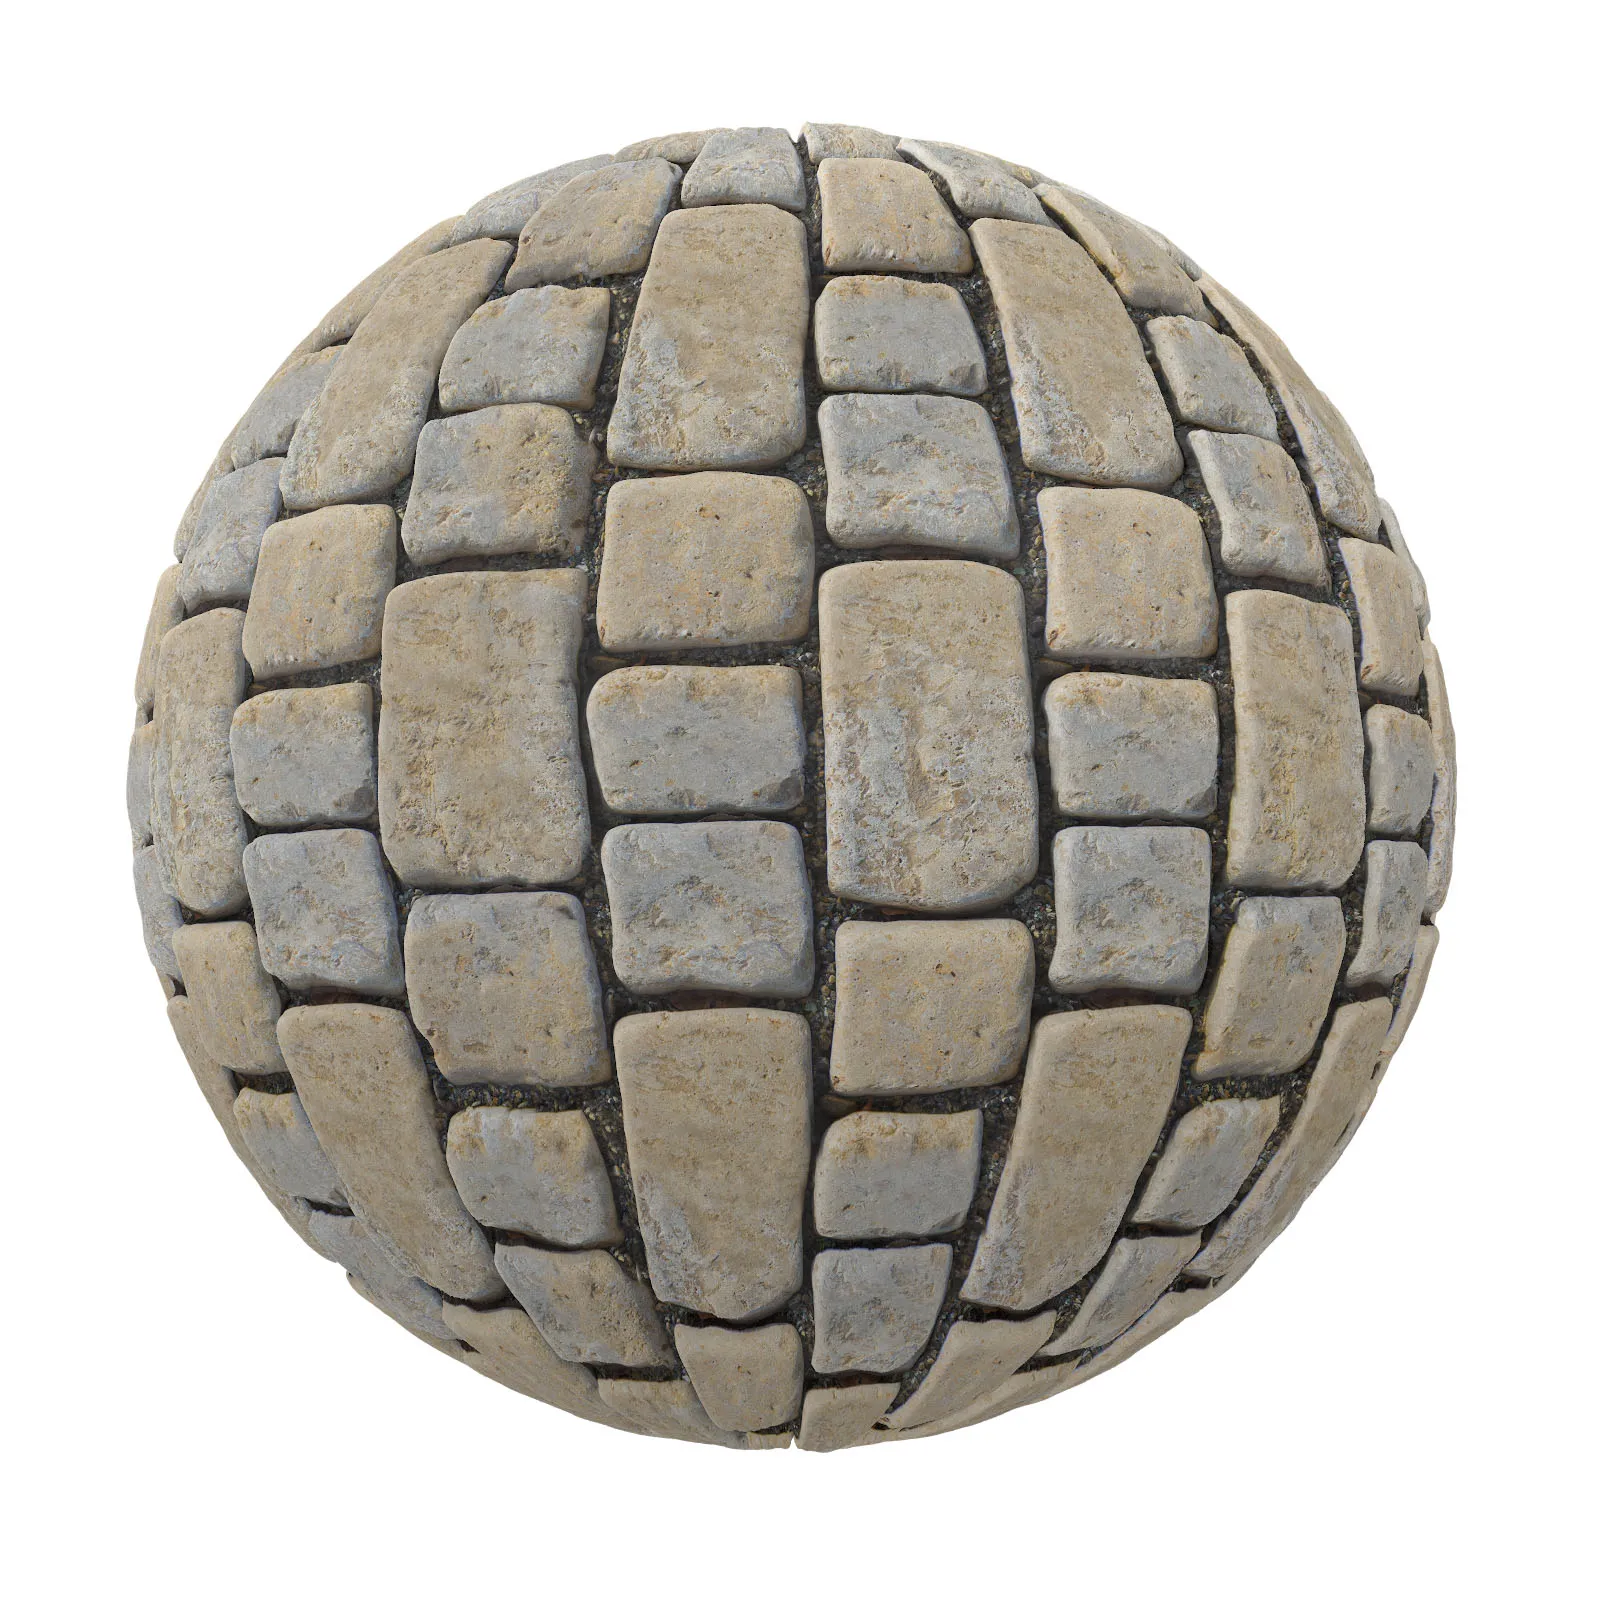 PBR CGAXIS TEXTURES – PAVEMENTS – Stone Pavement 10